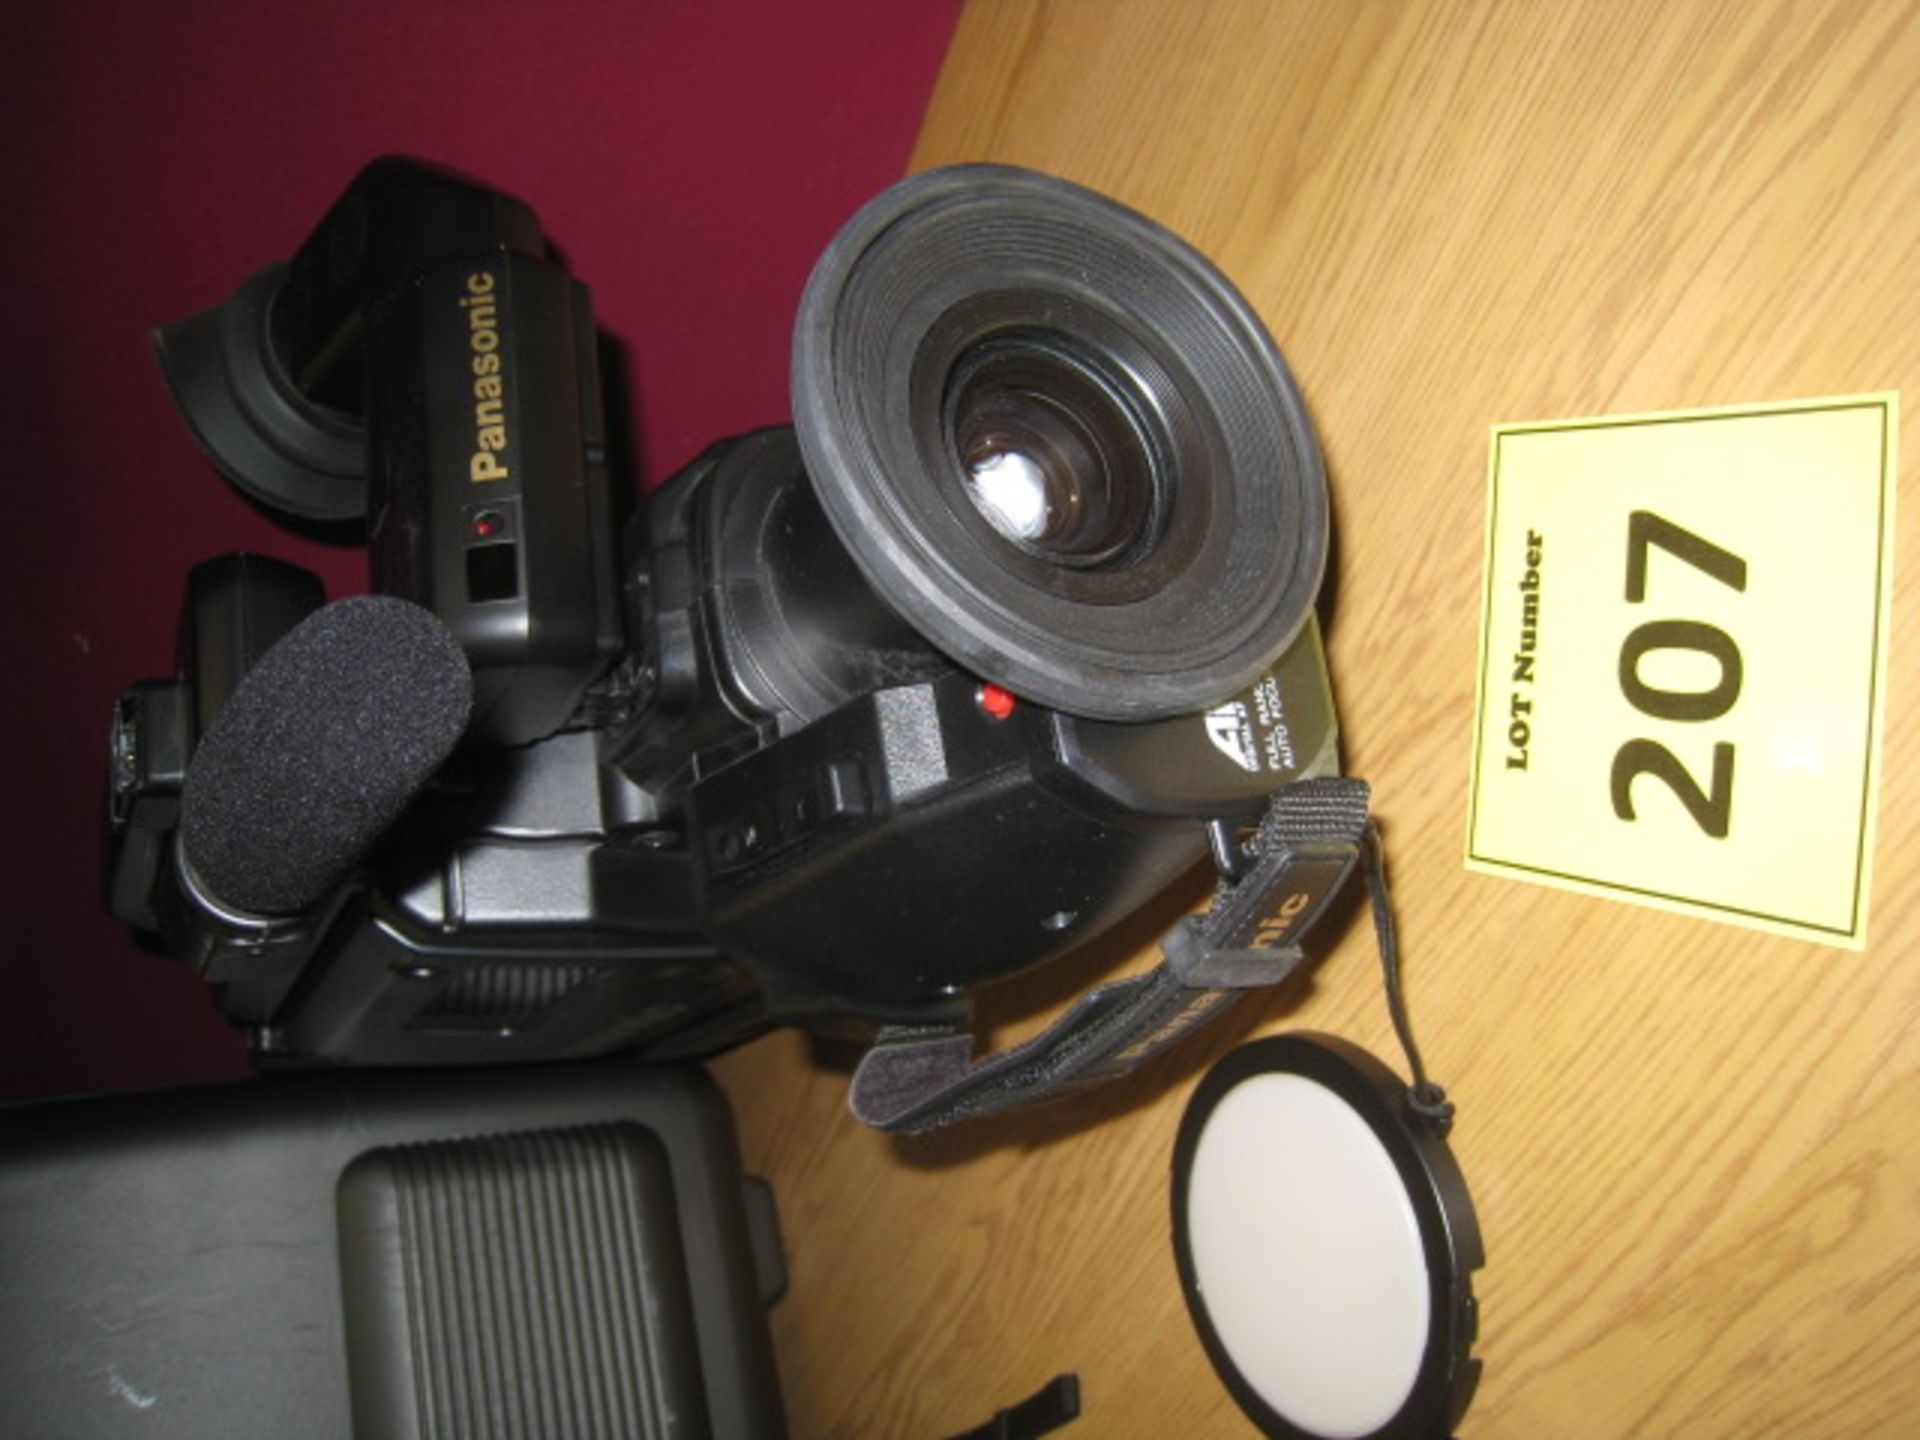 PANASONIC M40 VHS MOVIE CAMERA NV-M40 HQ. MODEL NV-M40B. IN MOULDED CARRY CASE WITH ATTACHMENTS AS - Image 4 of 5